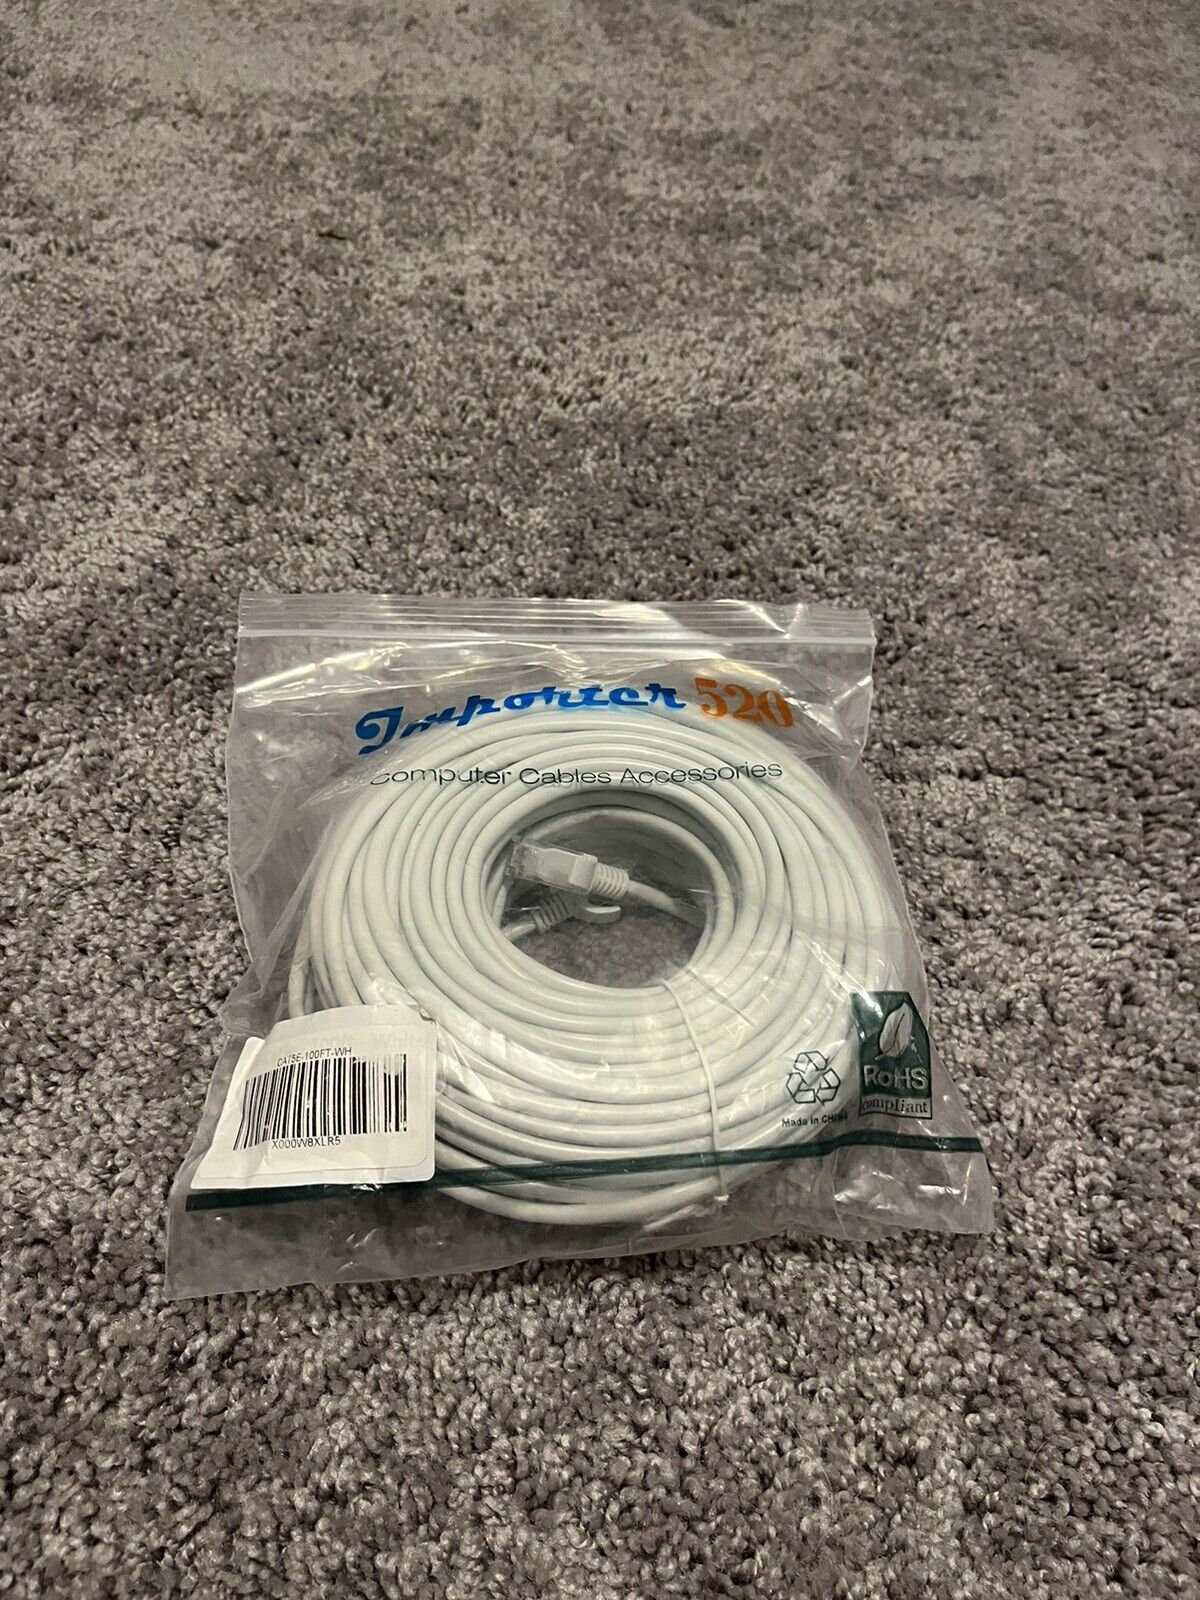 Importer520 100 COMPUTER CABLE ACCESSORIES Cable WHITE 100 Ft